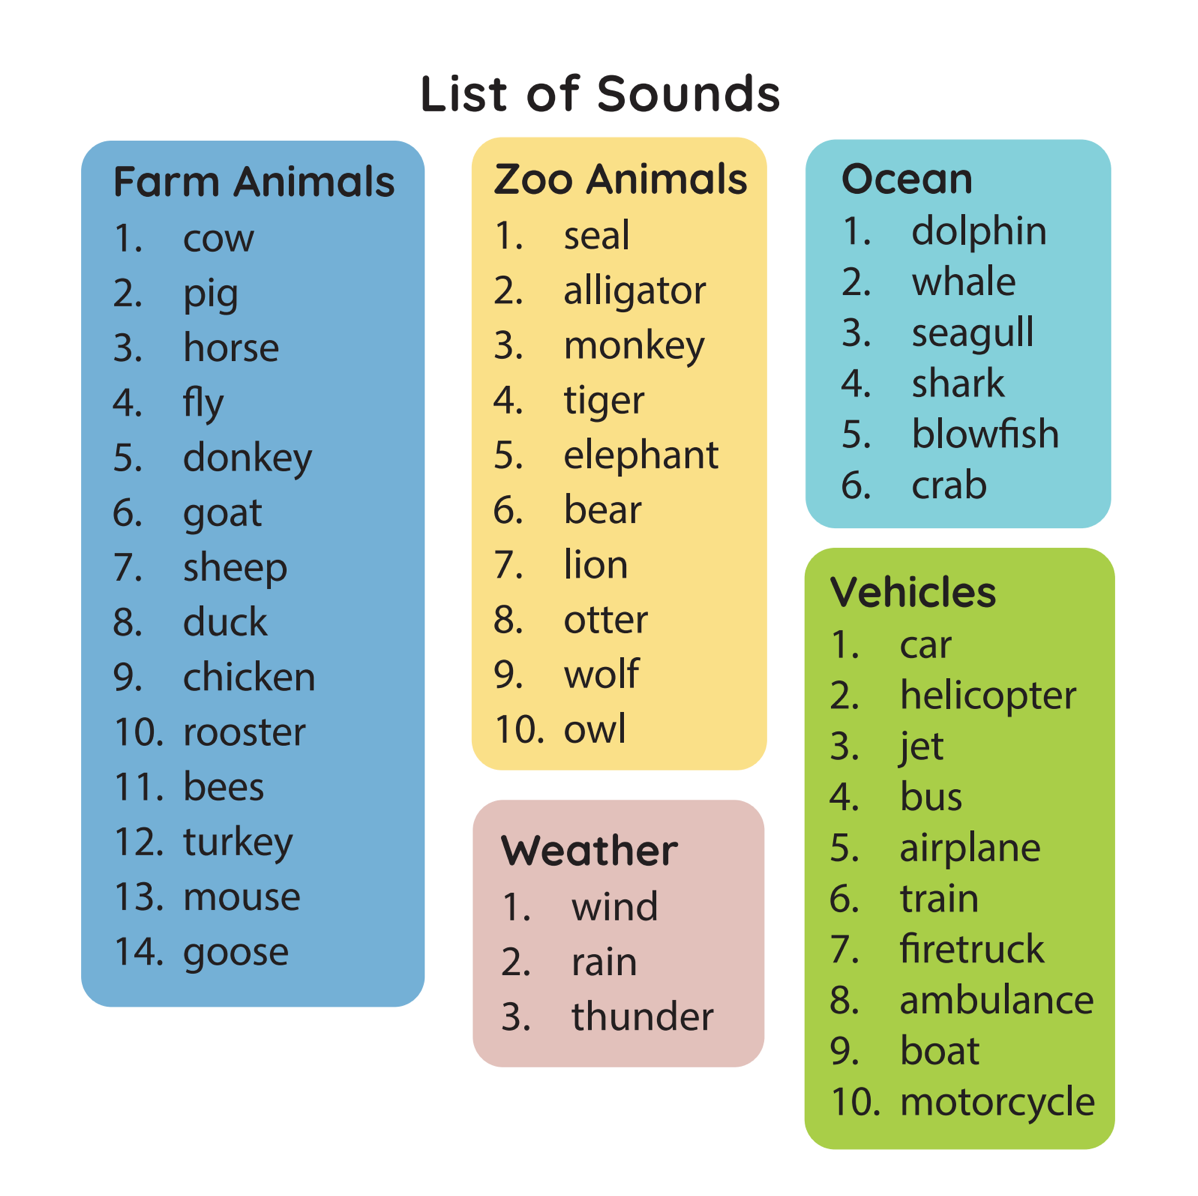 What Sound? - A Delightful Journey into the World of Sounds and Categories for Young Children